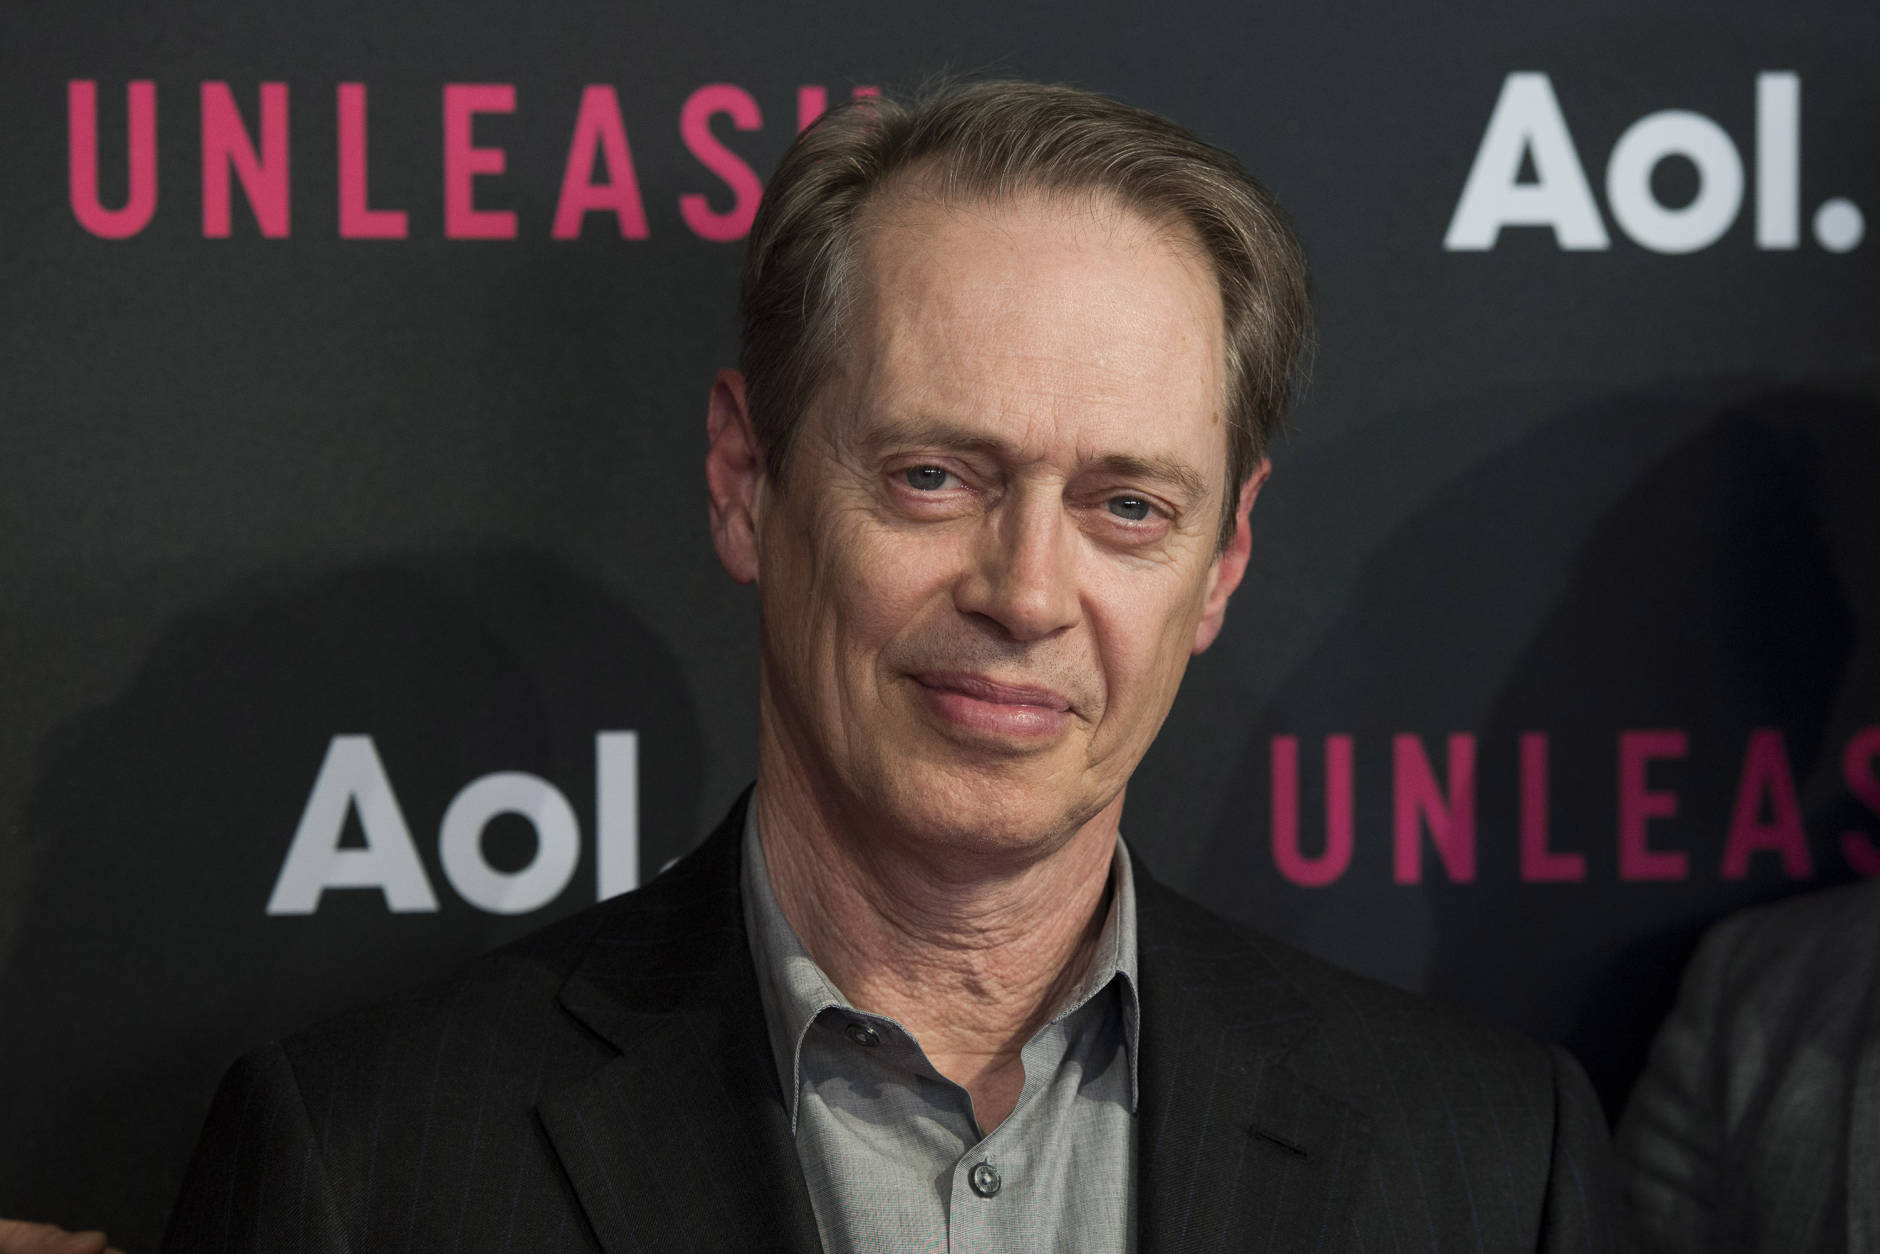 Steve Buscemi attends the AOL NewFront 2015 at 4 World Trade Center on Tuesday, April 28, 2015, in New York. (Photo by Charles Sykes/Invision/AP)